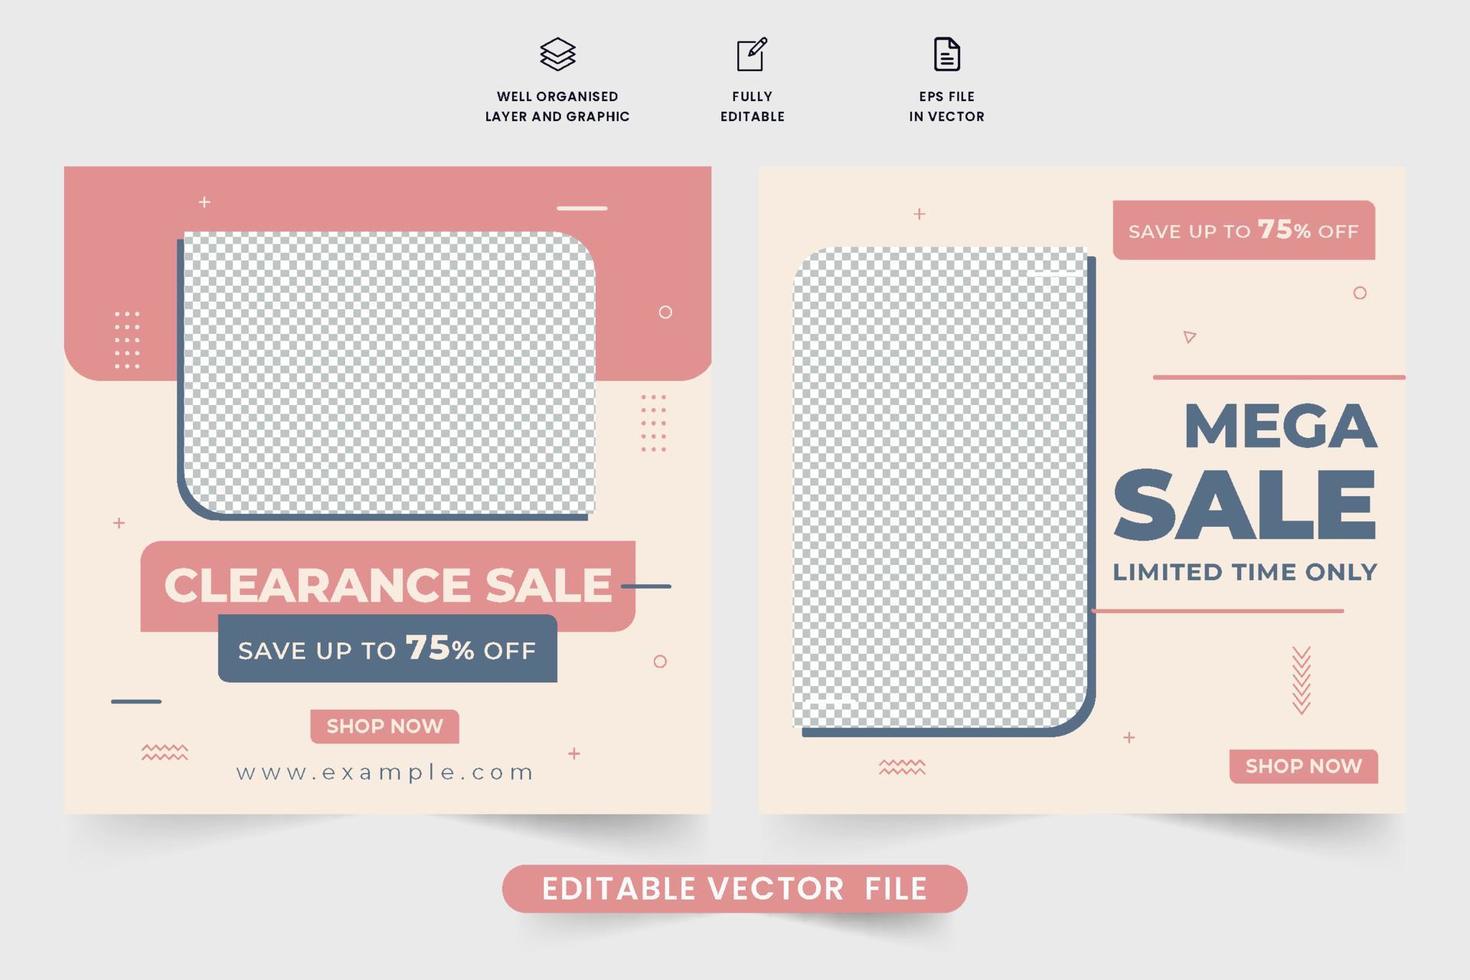 Clearance sale social media post design for digital marketing and shop promotion. Store sale discount advertisement template vector with pink and blue colors. Mega sale poster with photo placeholders.